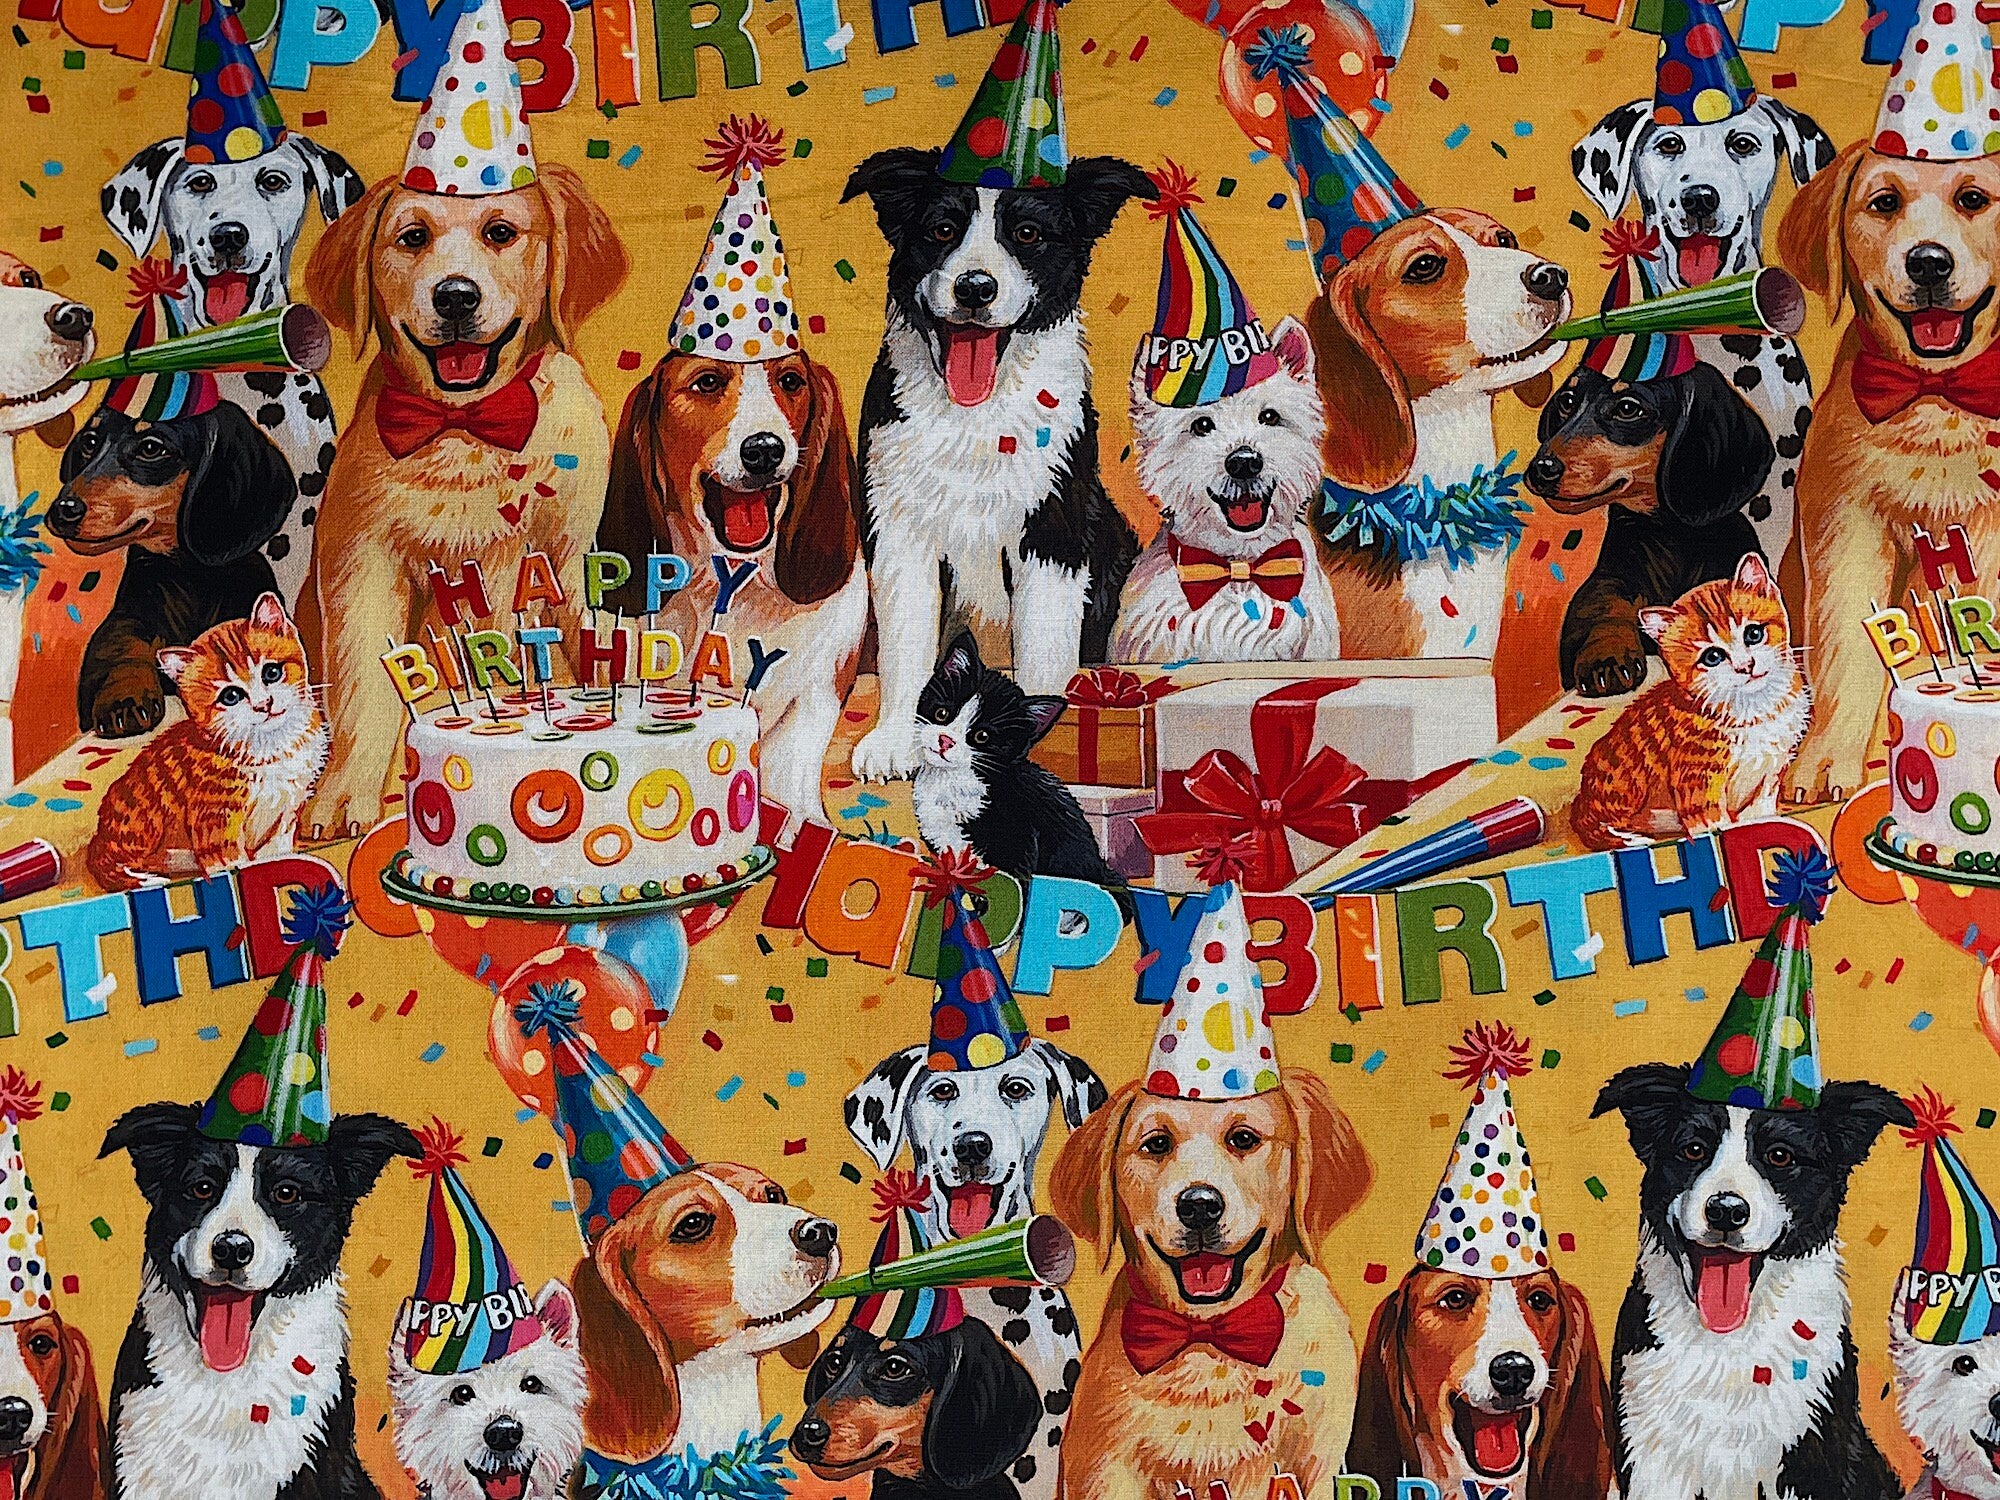 Here is a fun design of a Dog Birthday Bash. Looks like these dogs are having a fun Birthday Party. They are wearing party hats and blowing horns and if you look closely there are a couple of cat party crashers. What is a birthday bash without a cake and some presents.